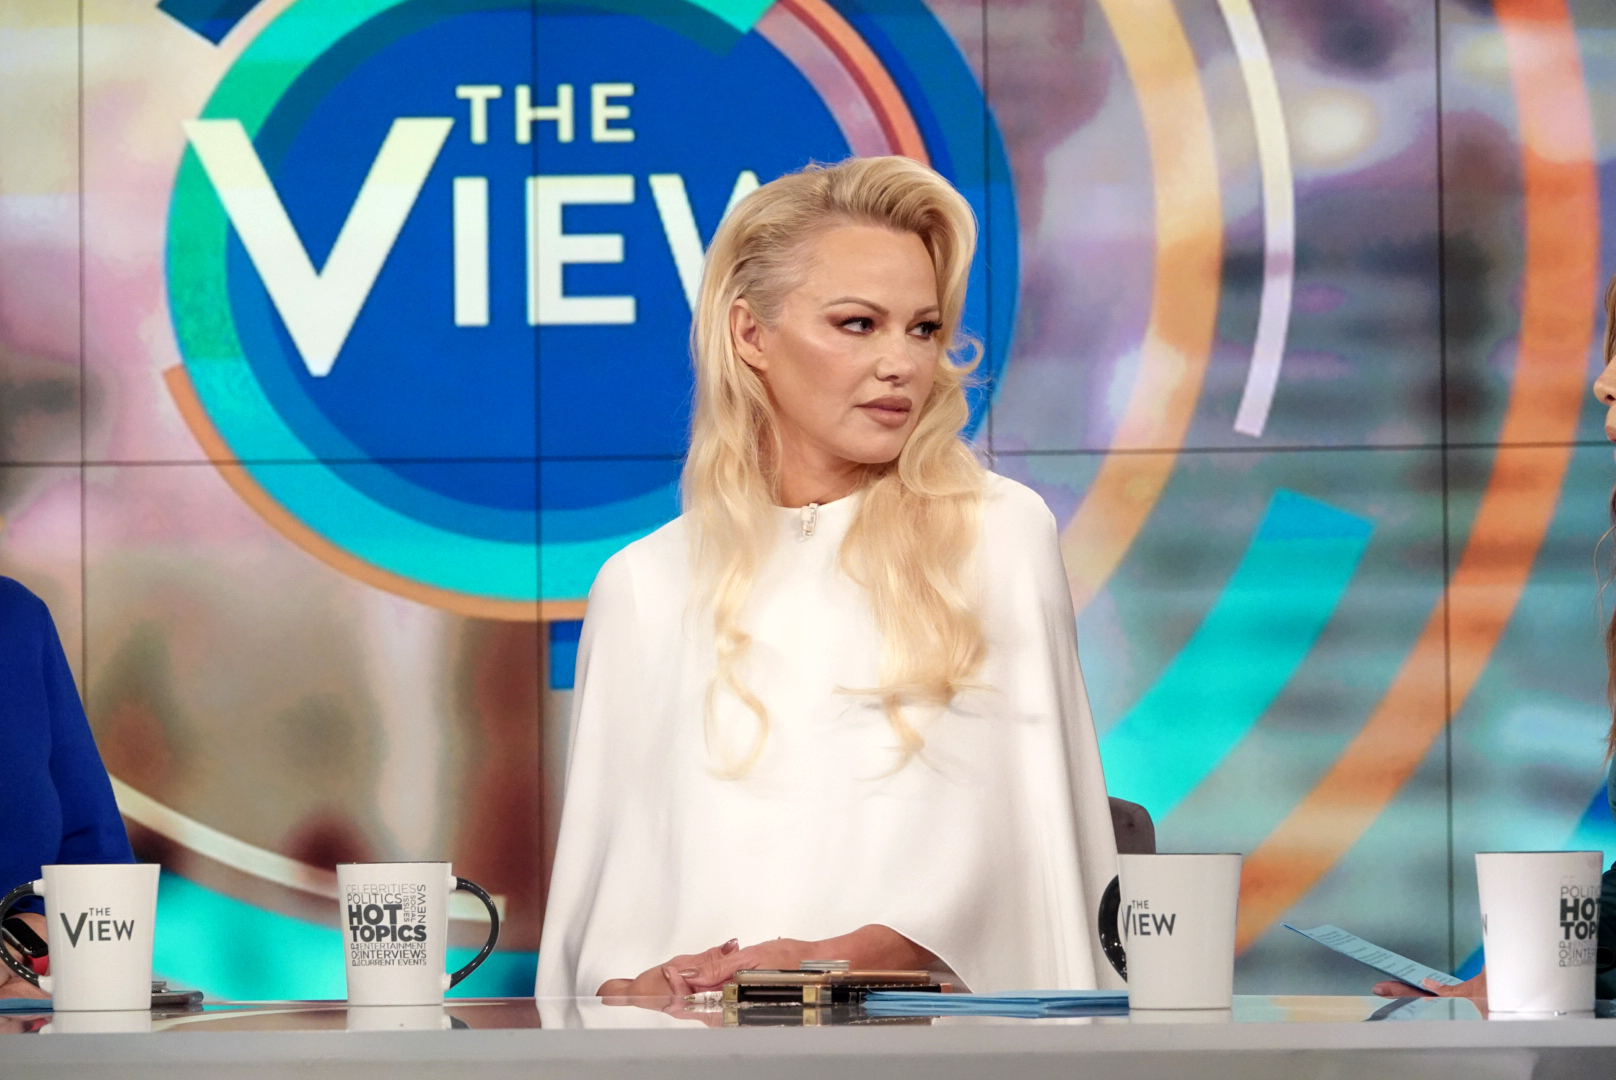 PHOTO: Pamela Anderson speaks out about Julian Assange on "The View," Sept. 6, 2019, in her first TV interview since visiting him in May.